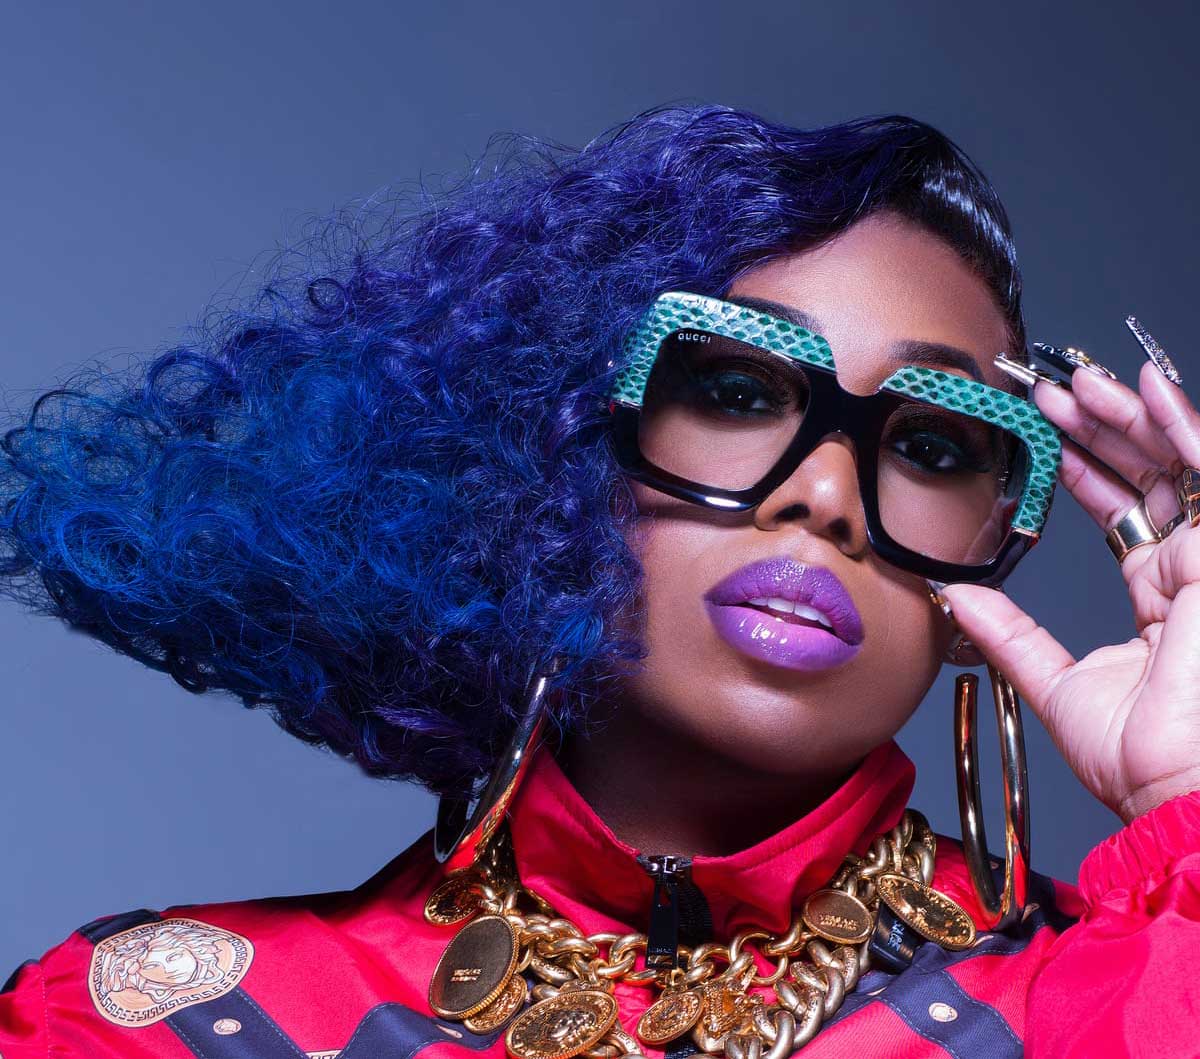 Who Are the Top 5 Female Rappers of AllTime?